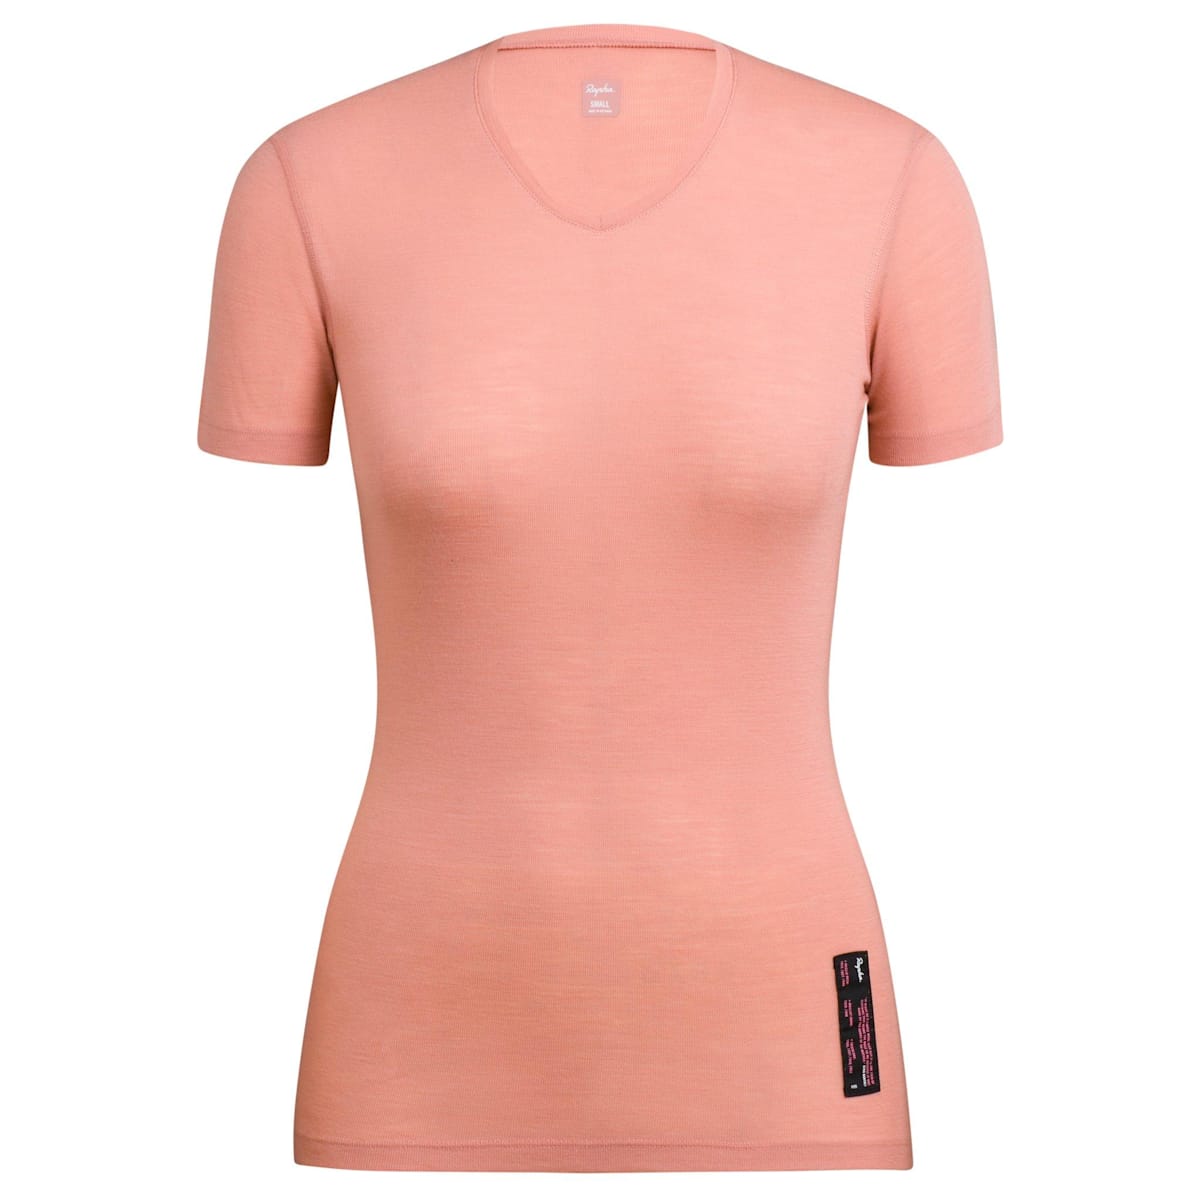 Women's Thermal Base Layer, Womens Rapha Insulated Base Layer For Cycling  In Cold Weathers